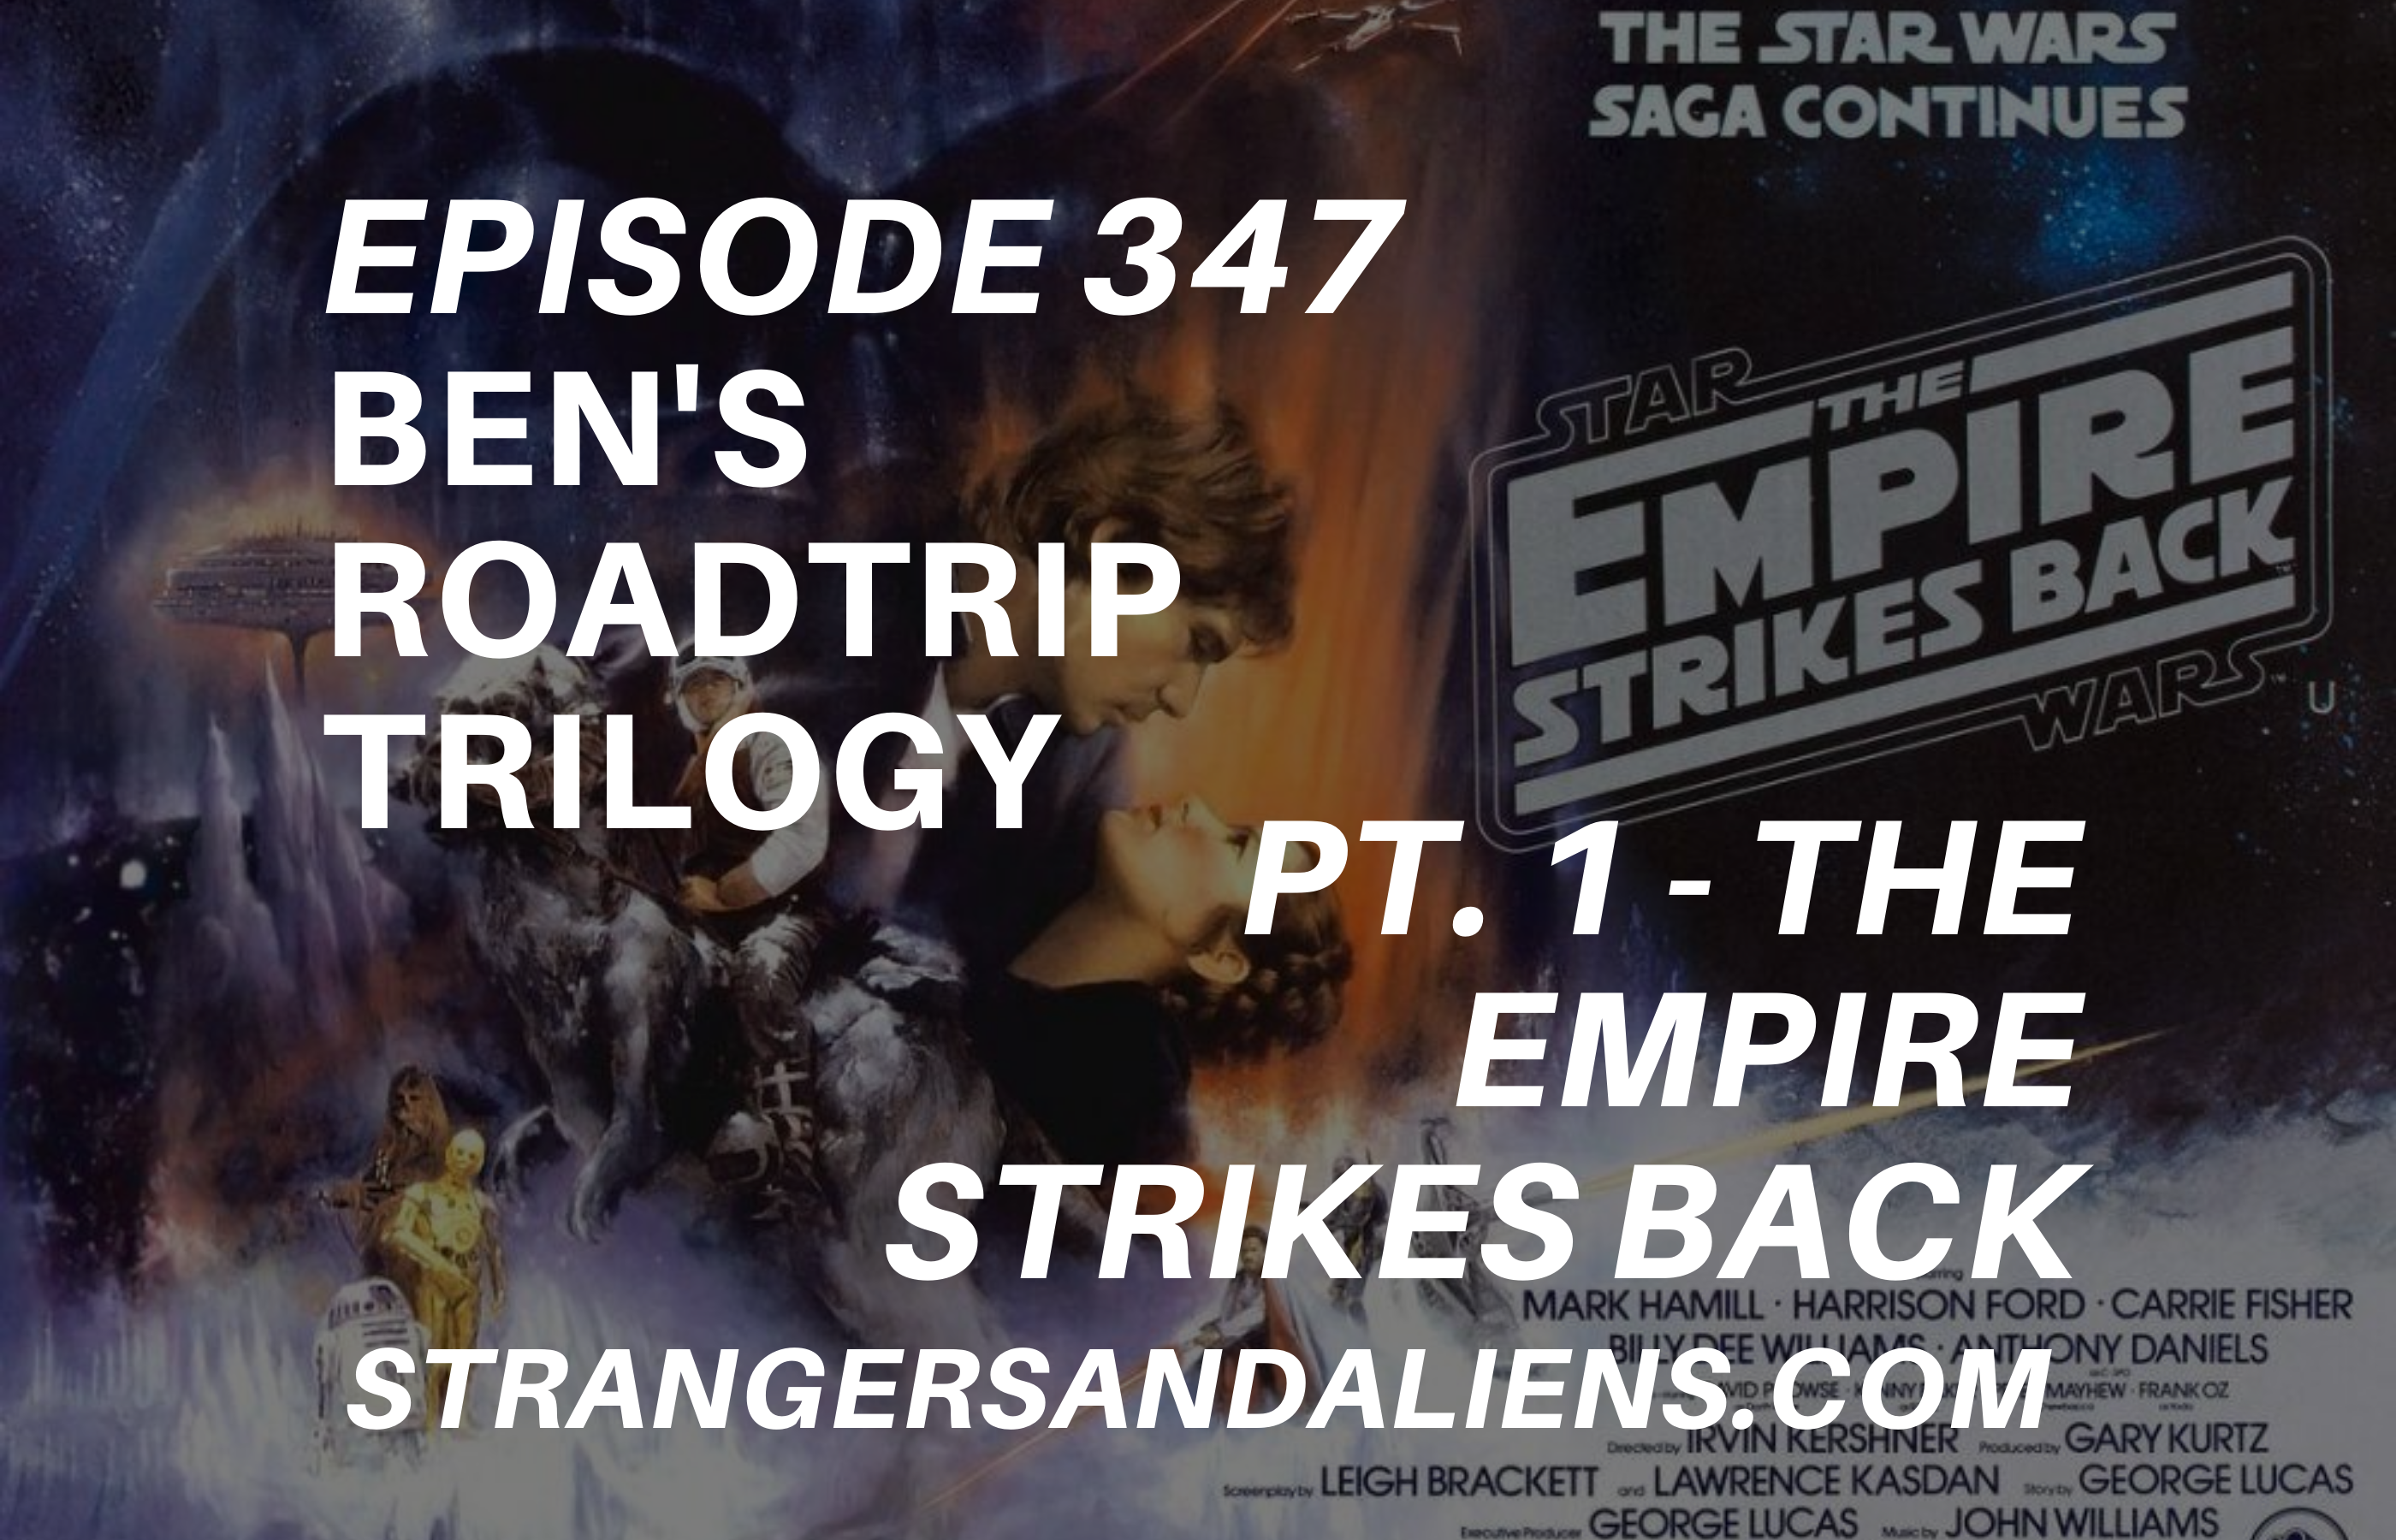 THE EMPIRE STRIKES BACK: Ben’s Road Trip Trilogy Part One – SA347